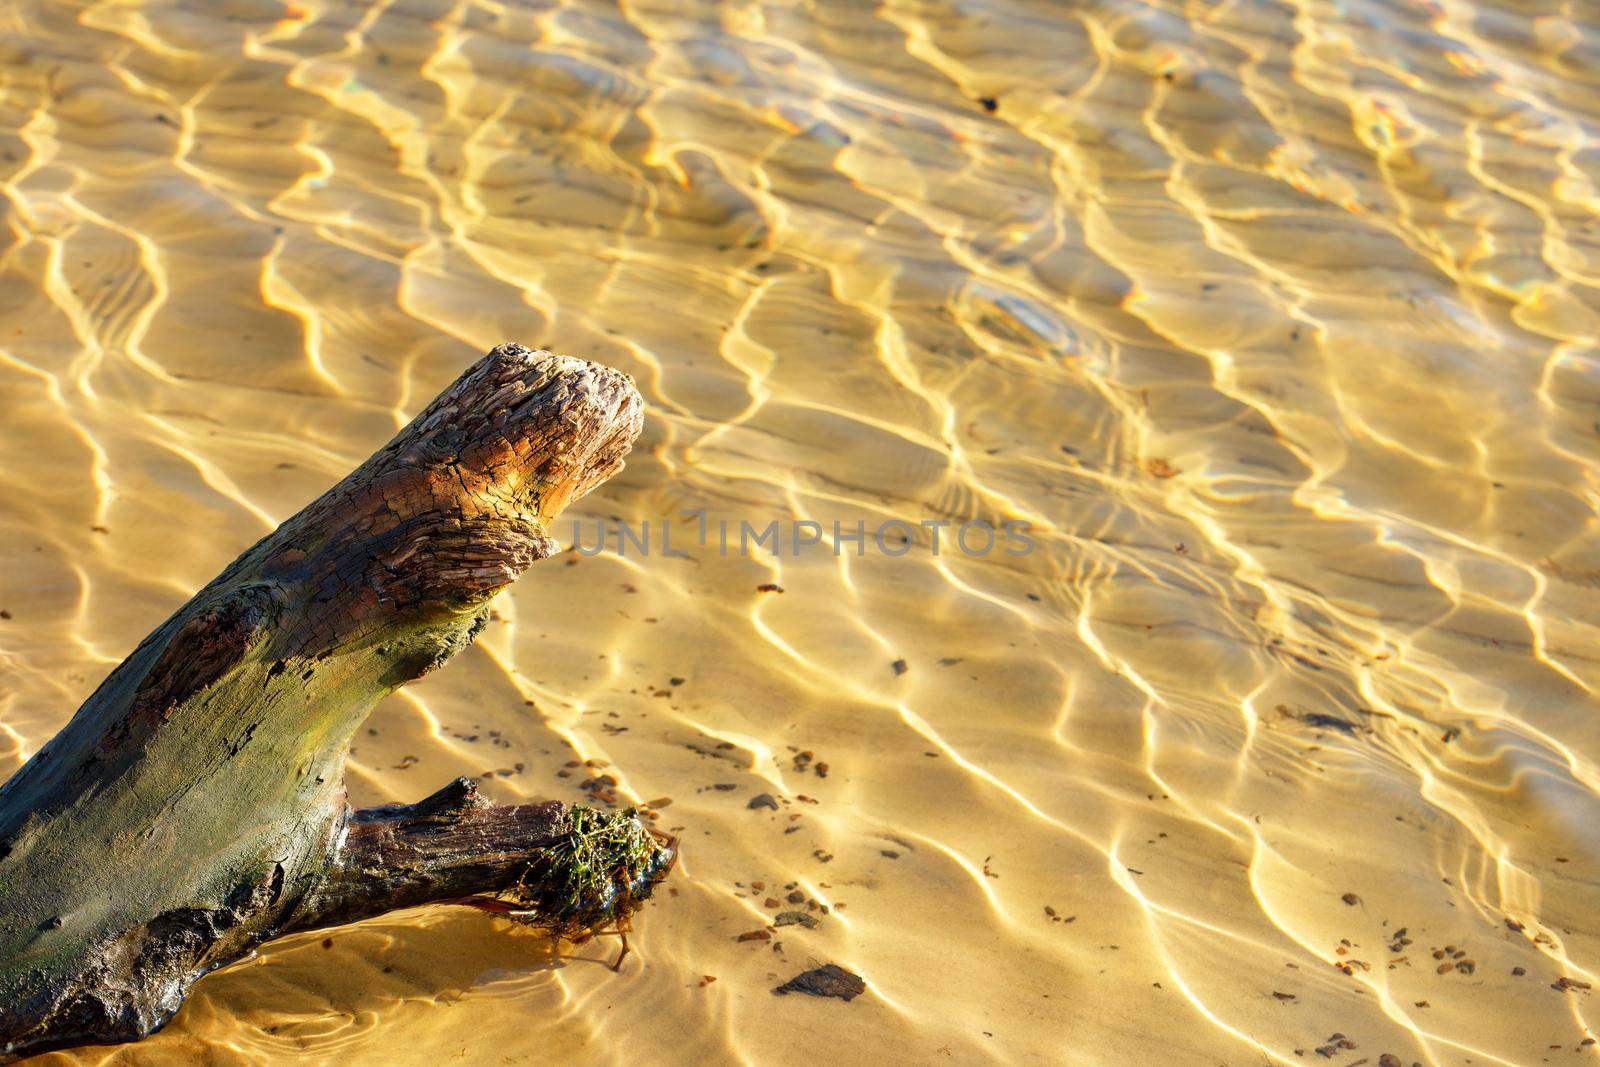 A wet driftwood of an old tree lies in the sandy shallow water against the background of transparent water and sun glare on the ripples, copy space.